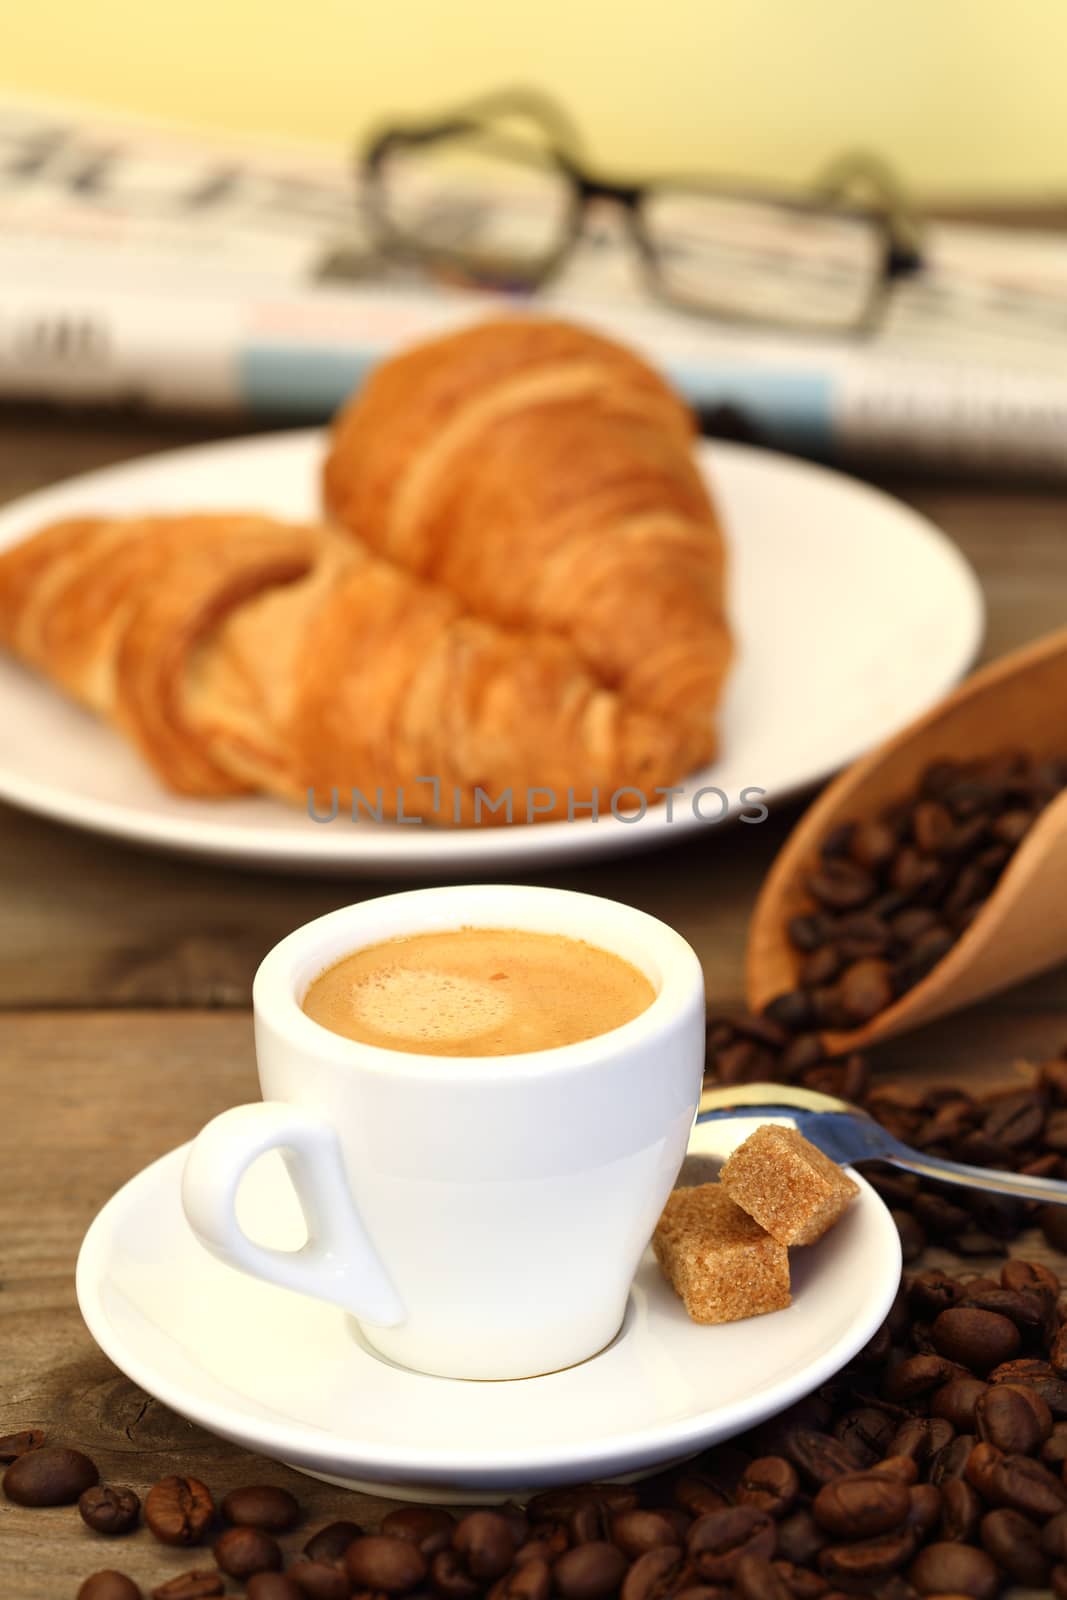 Coffee and croissants on wooden table shallow dof